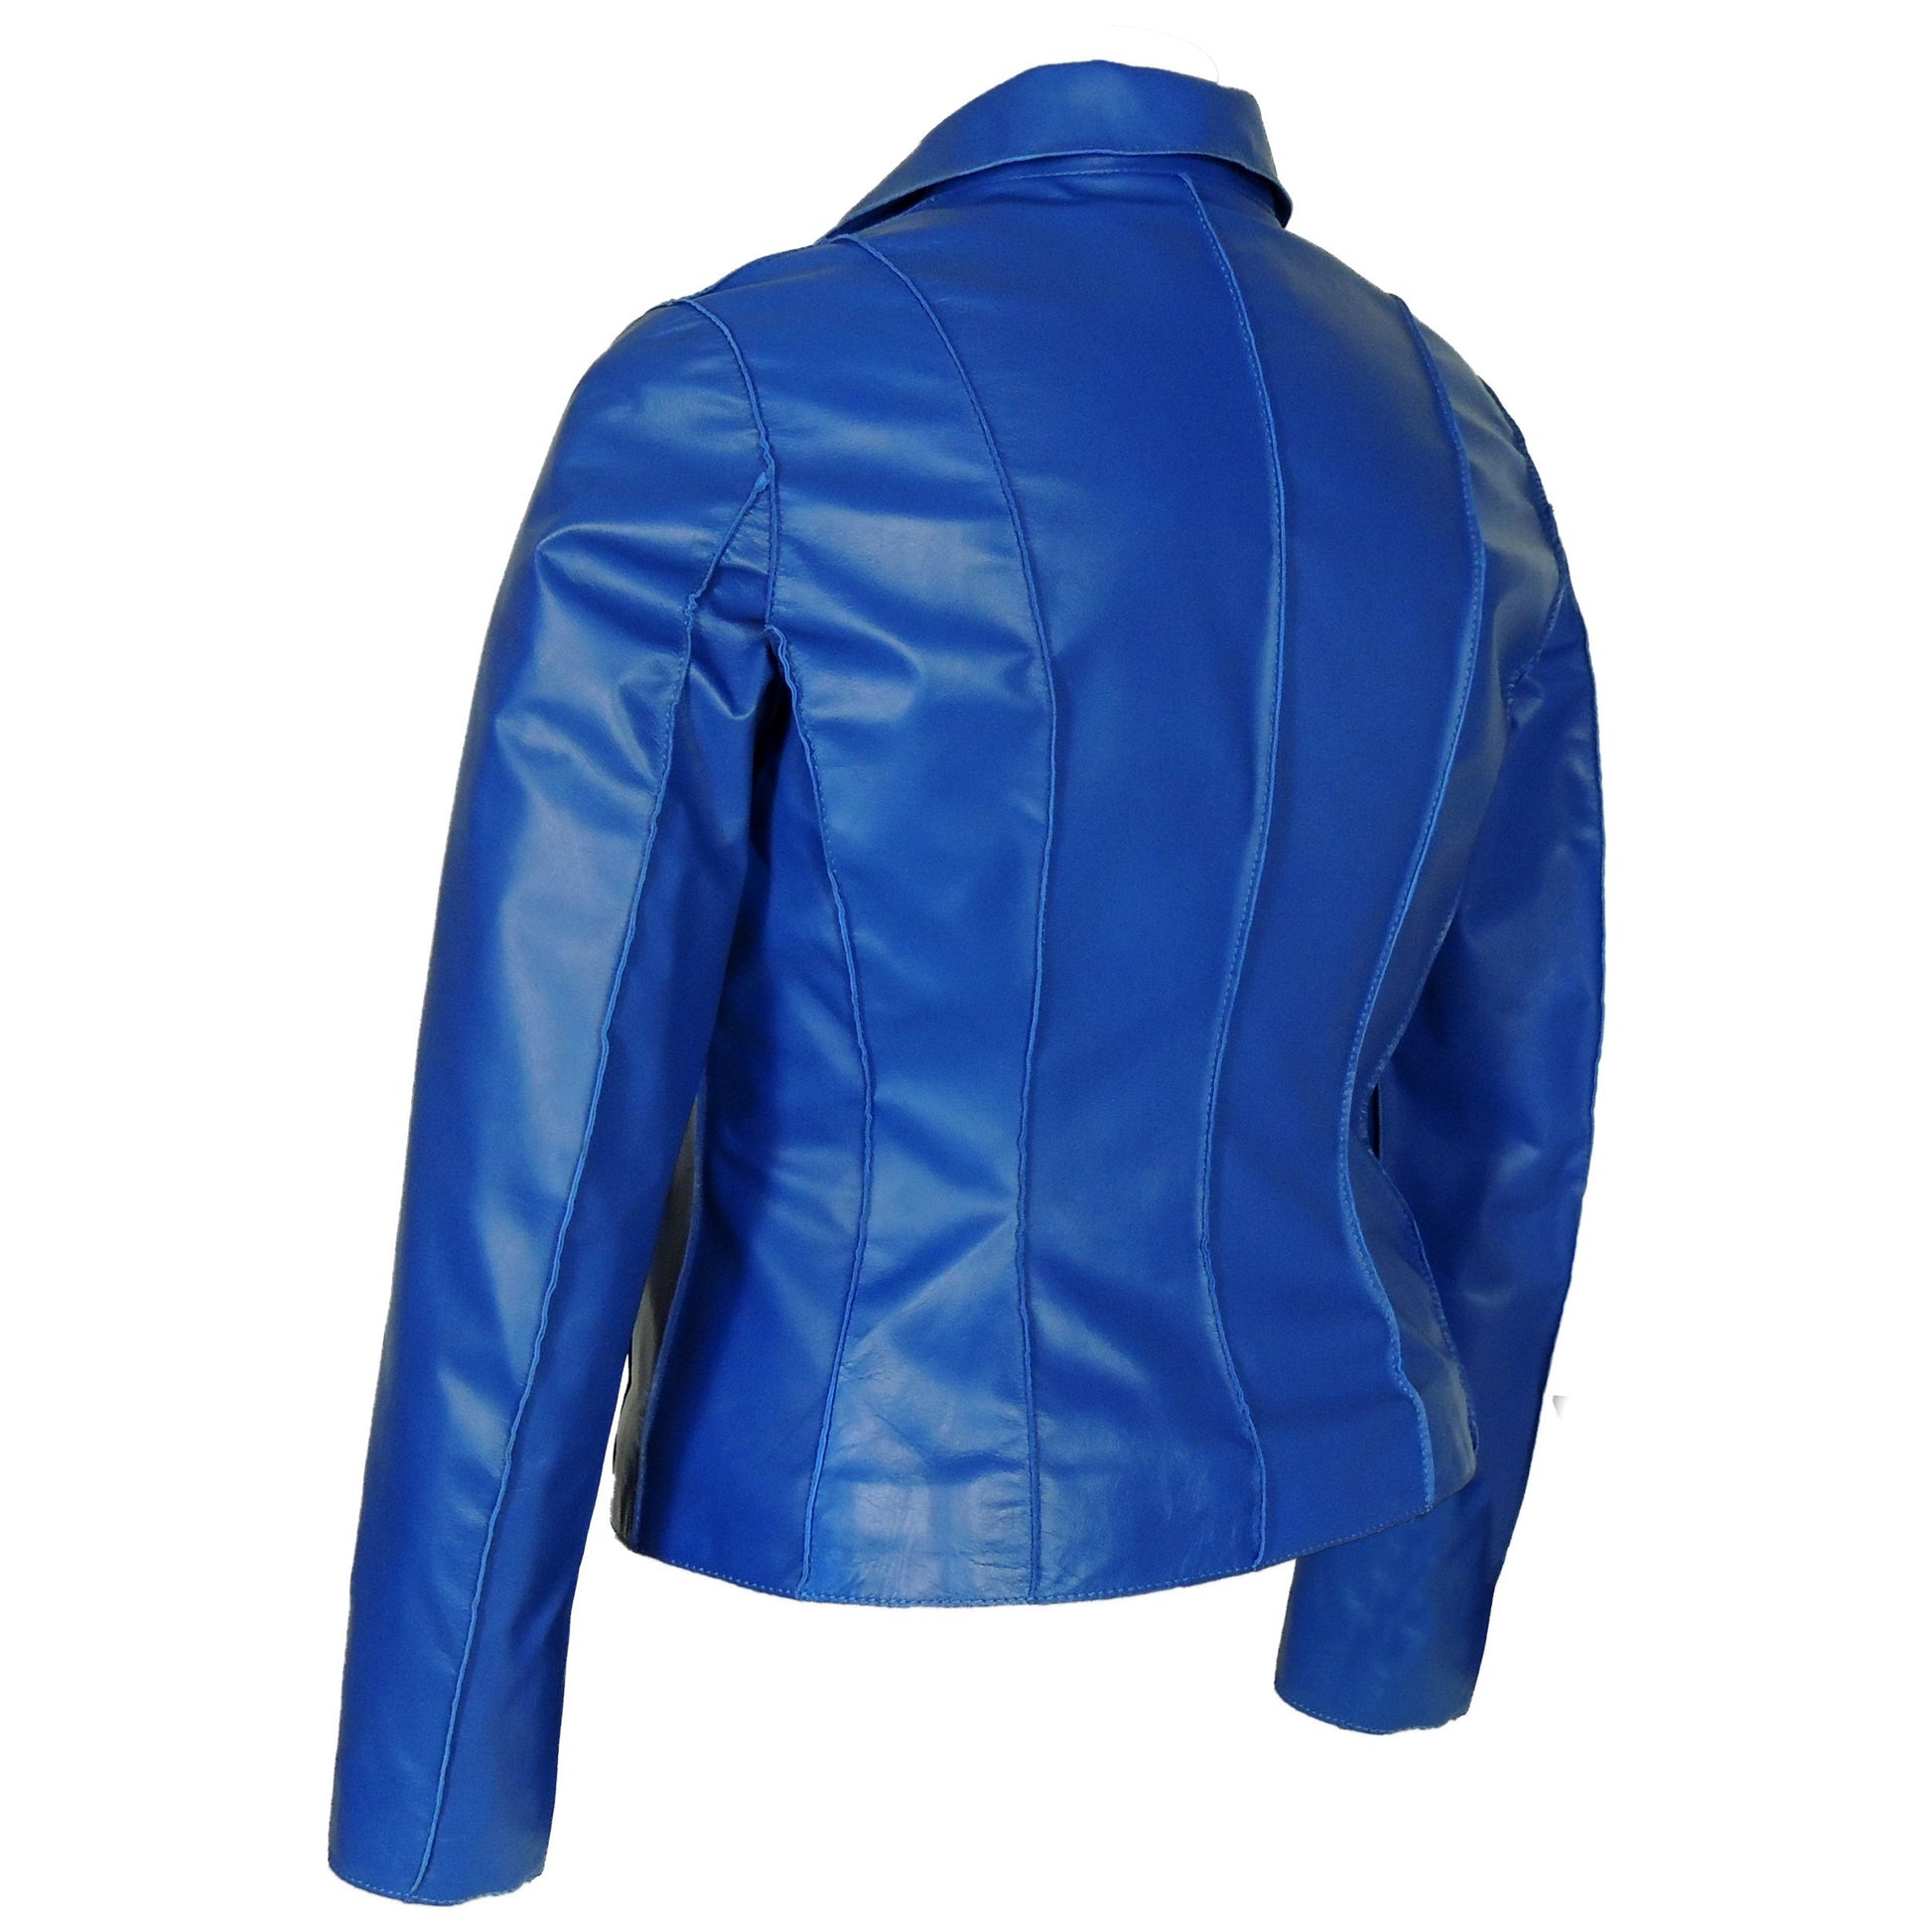 Picture of a Women's Professional Stunner Sheepskin Leather Jacket back side view blue